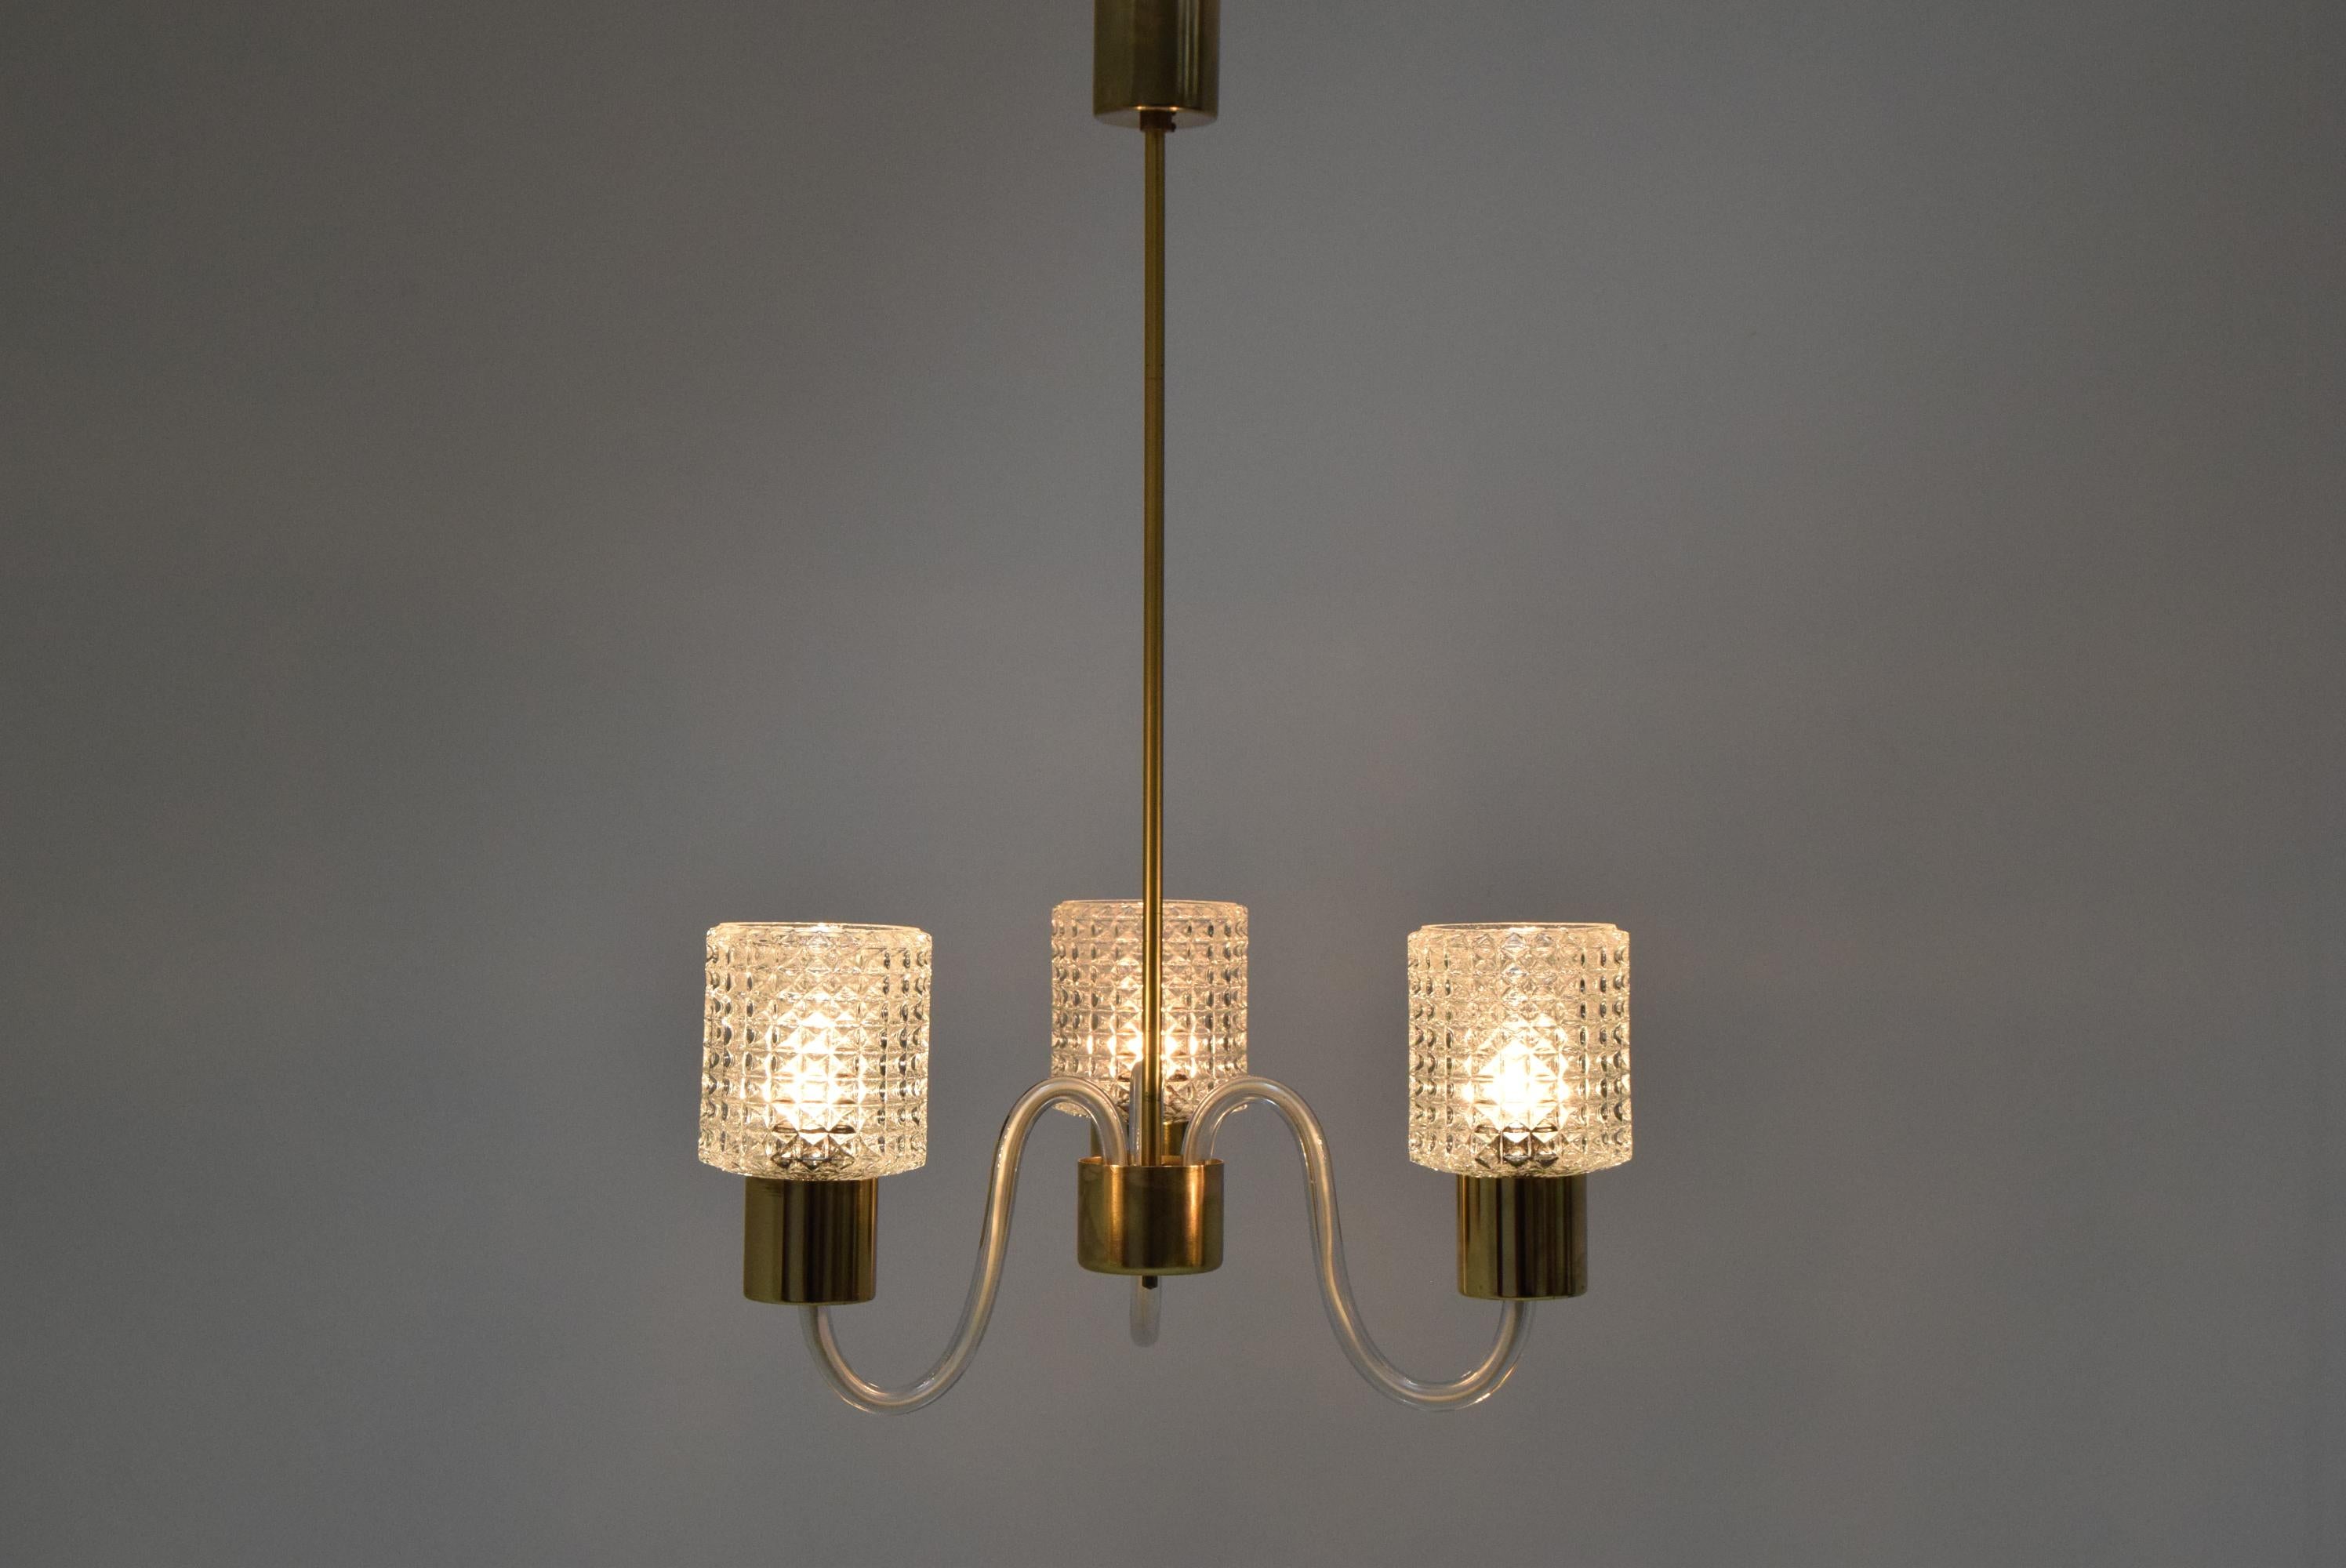 Made in Czechoslovakia
Made of Glass and Brass
Re-Polished
With Aged Patina
3x40W, E27 or E26 Bulb
Good Original Condition
US Wiring Compatible.
 